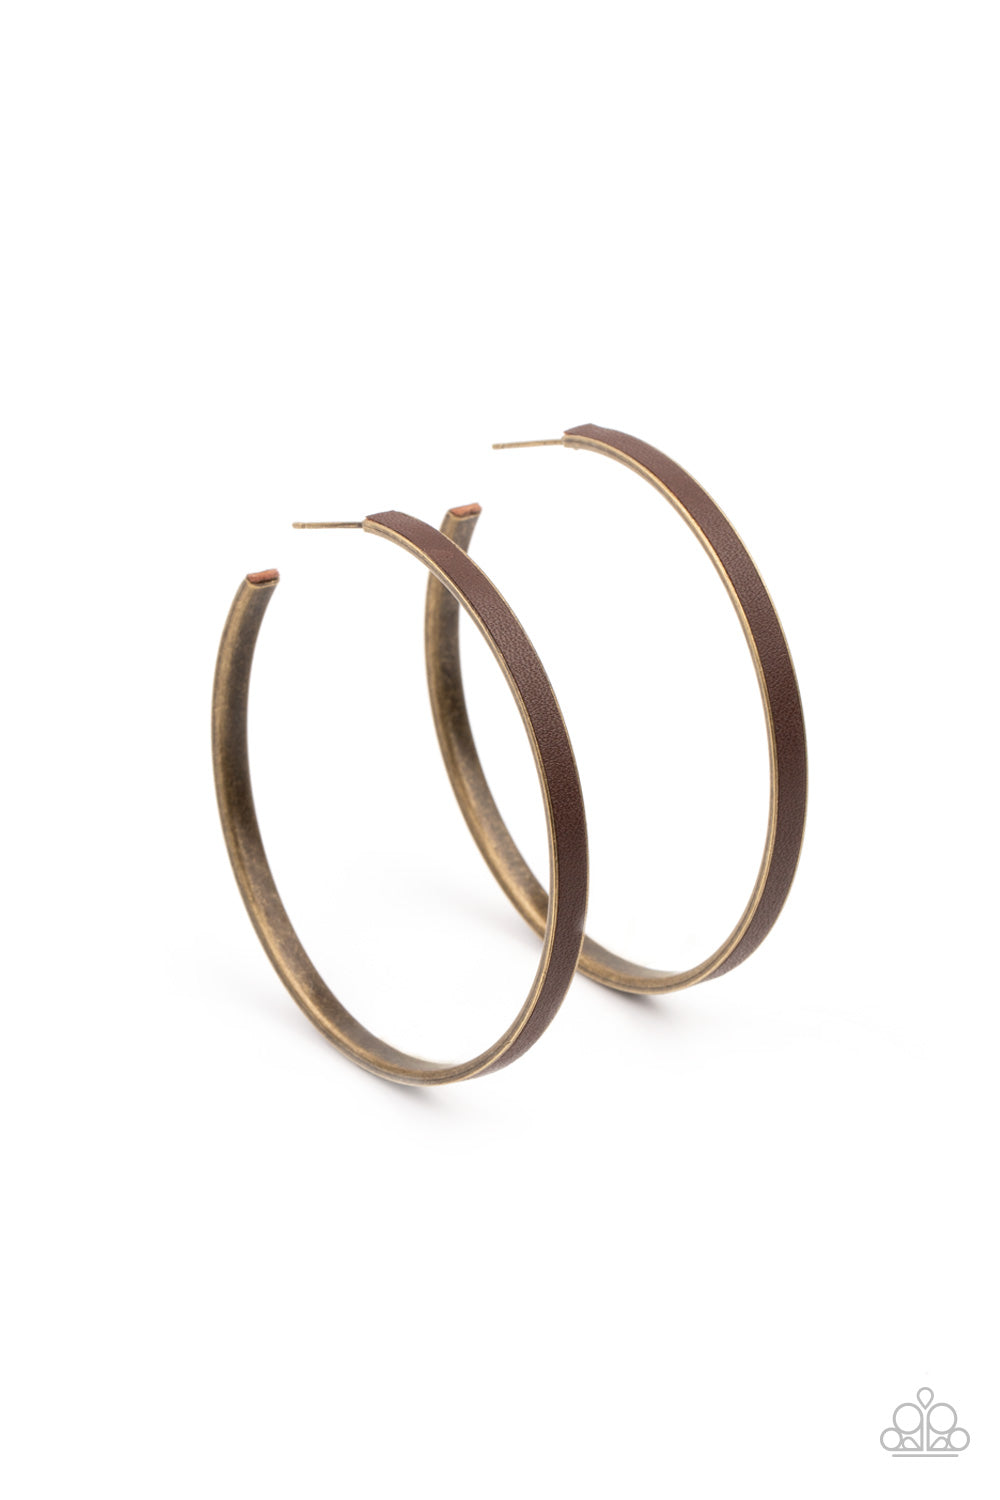 Fearless Flavor Brass Hoop Earring - Paparazzi Accessories  A brown leather lace is pressed along the indented spine of a brass hoop, creating a bold pop of color. Earring attaches to a standard post fitting. Hoop measure approximately 2 1/4" in diameter.  Sold as one pair of hoop earrings.